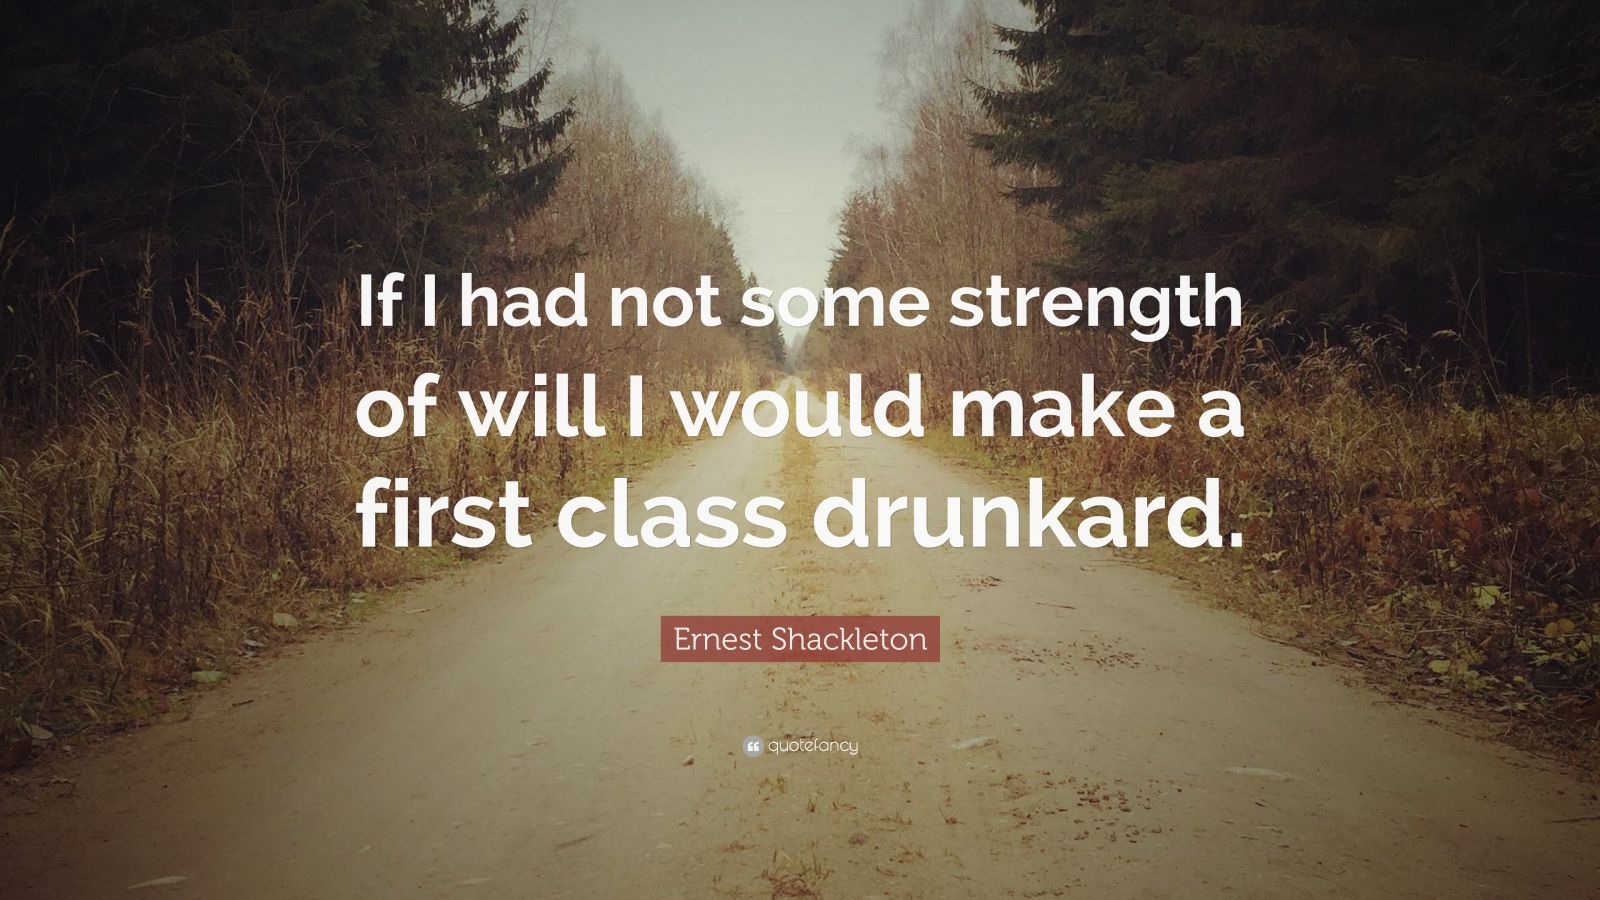 Ernest Shackleton Quote: “If I had not some strength of will I would